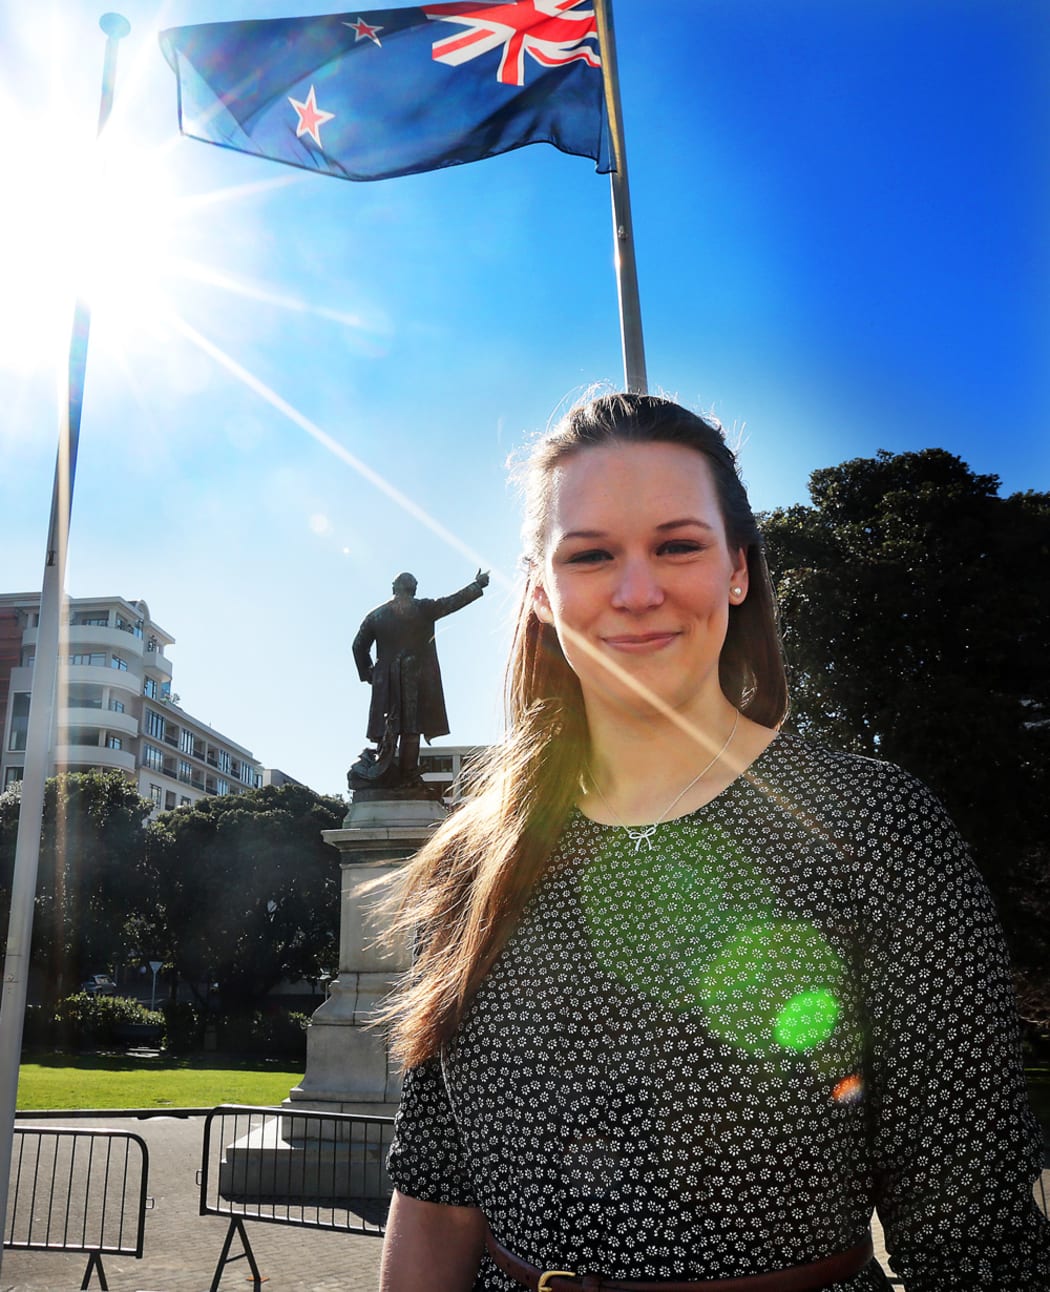 Monarchy New Zealand vice chairperson Chloe Oldfield saysa convincing mandate from the public is needed if the Government is to change the national flag.